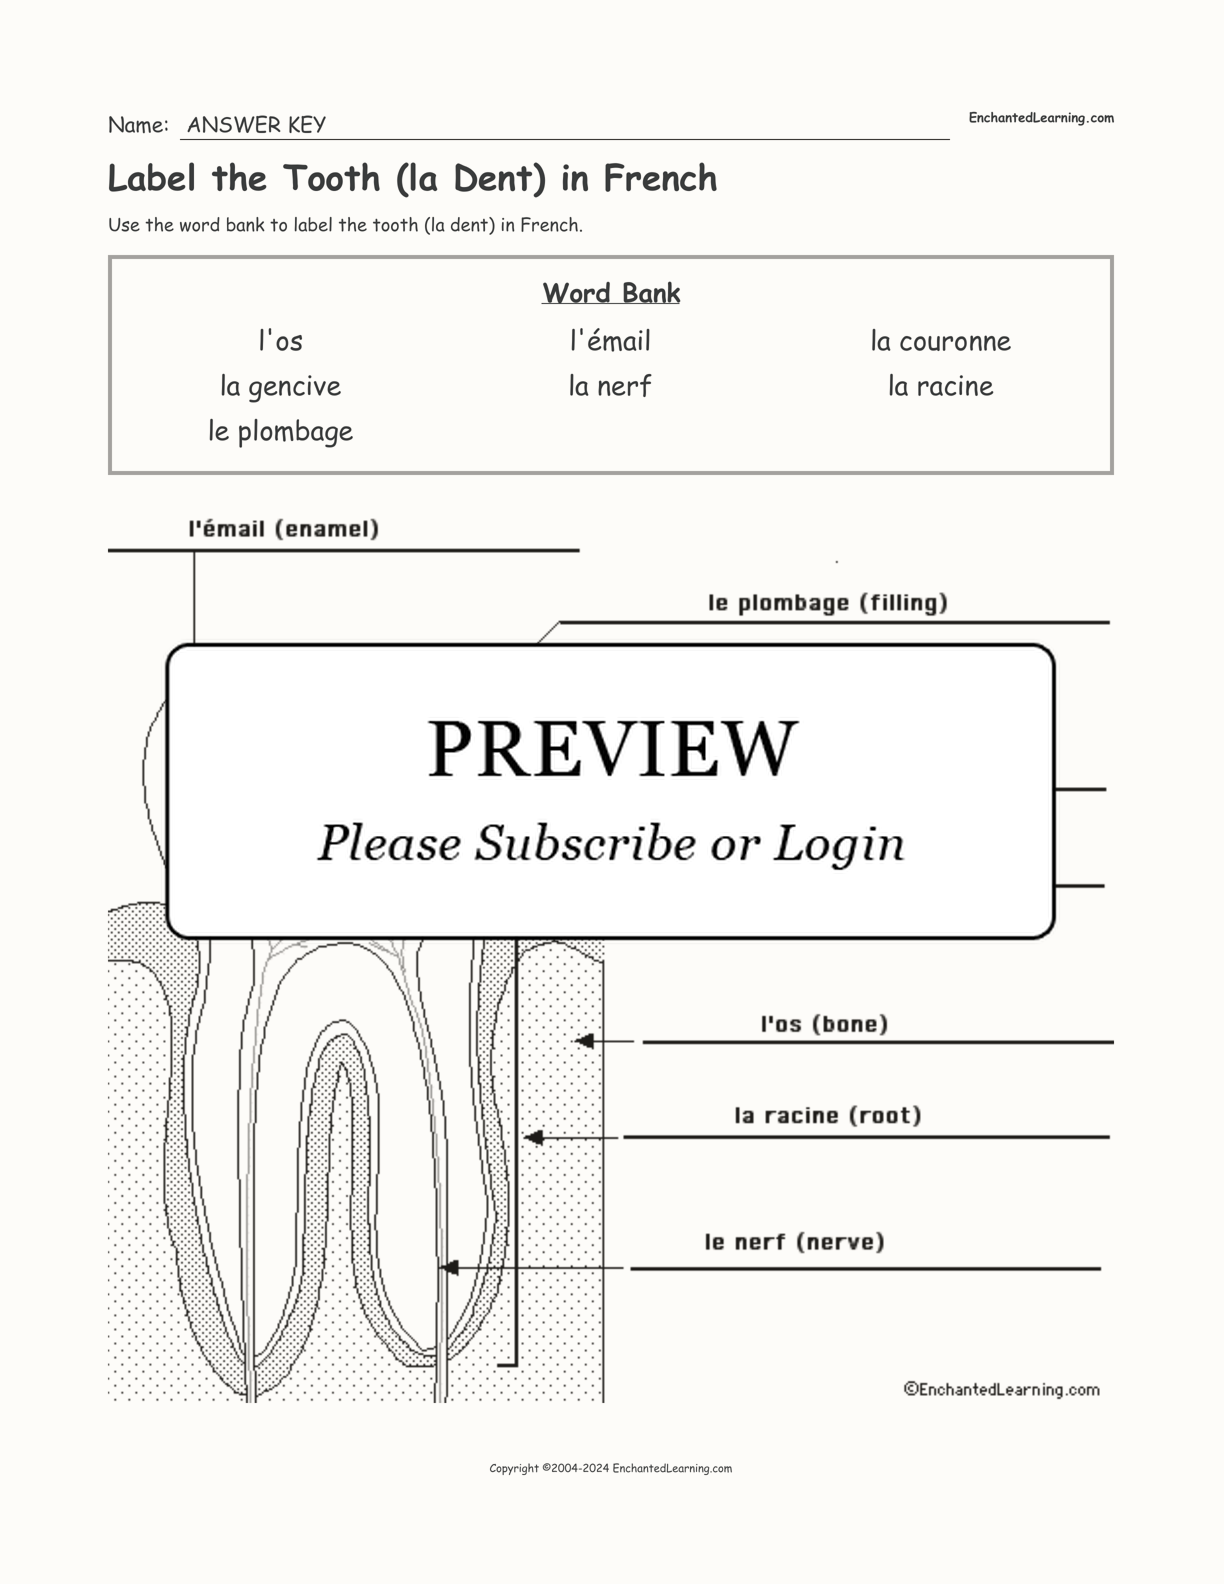 Label the Tooth (la Dent) in French interactive worksheet page 2